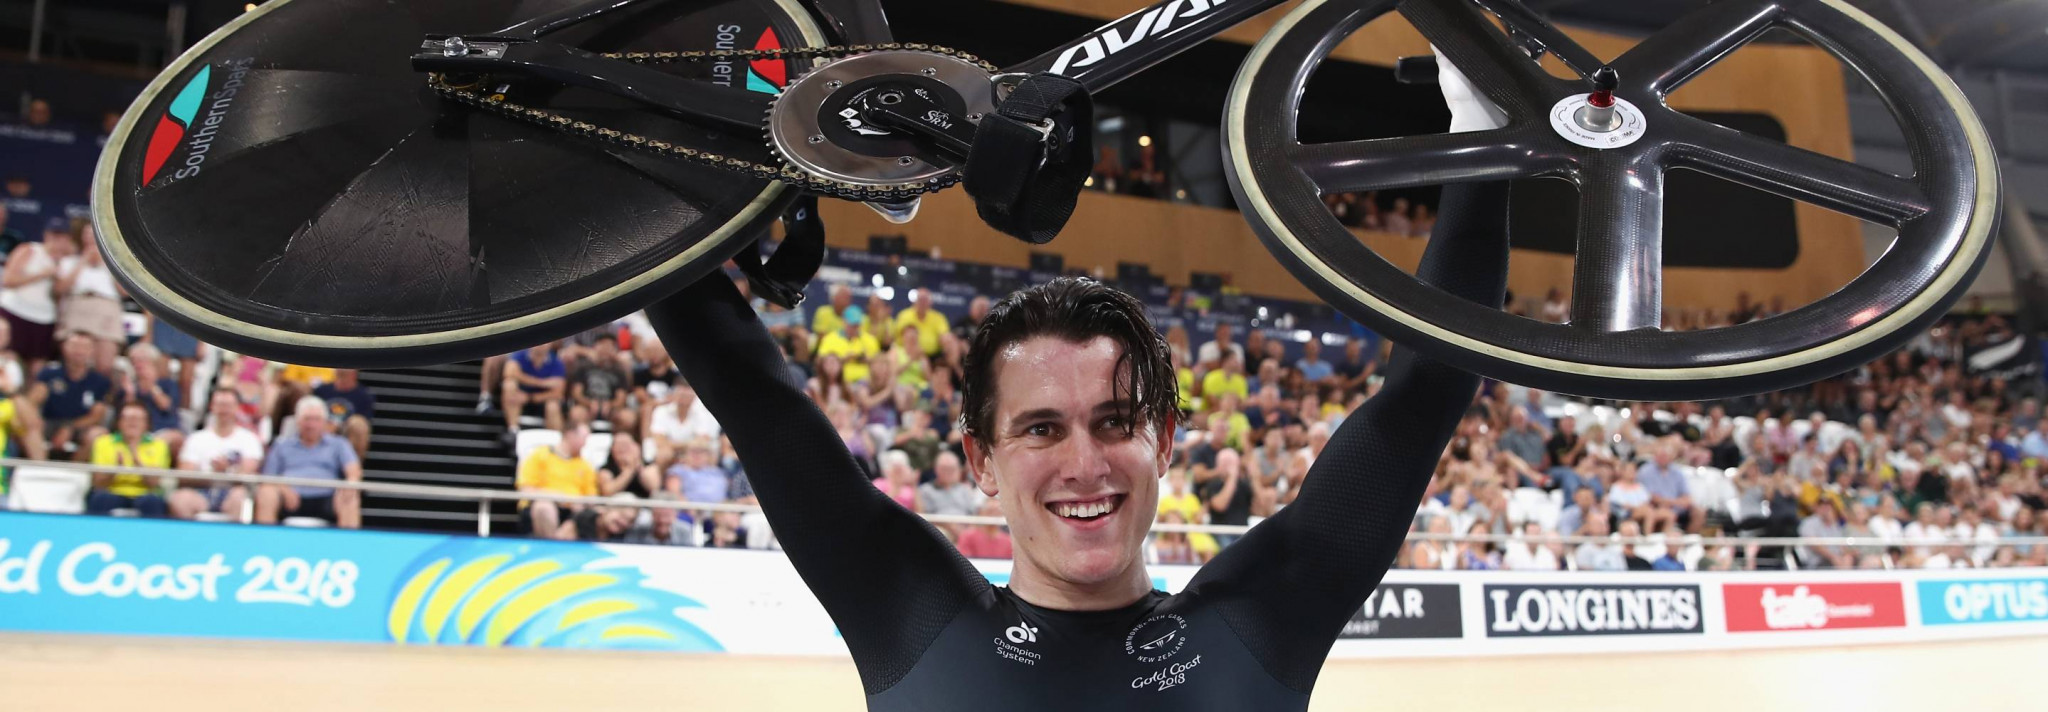 New Zealand’s most successful track cyclist, Sam Webster, has announced his retirement aged 31 ©olympic.org.nz